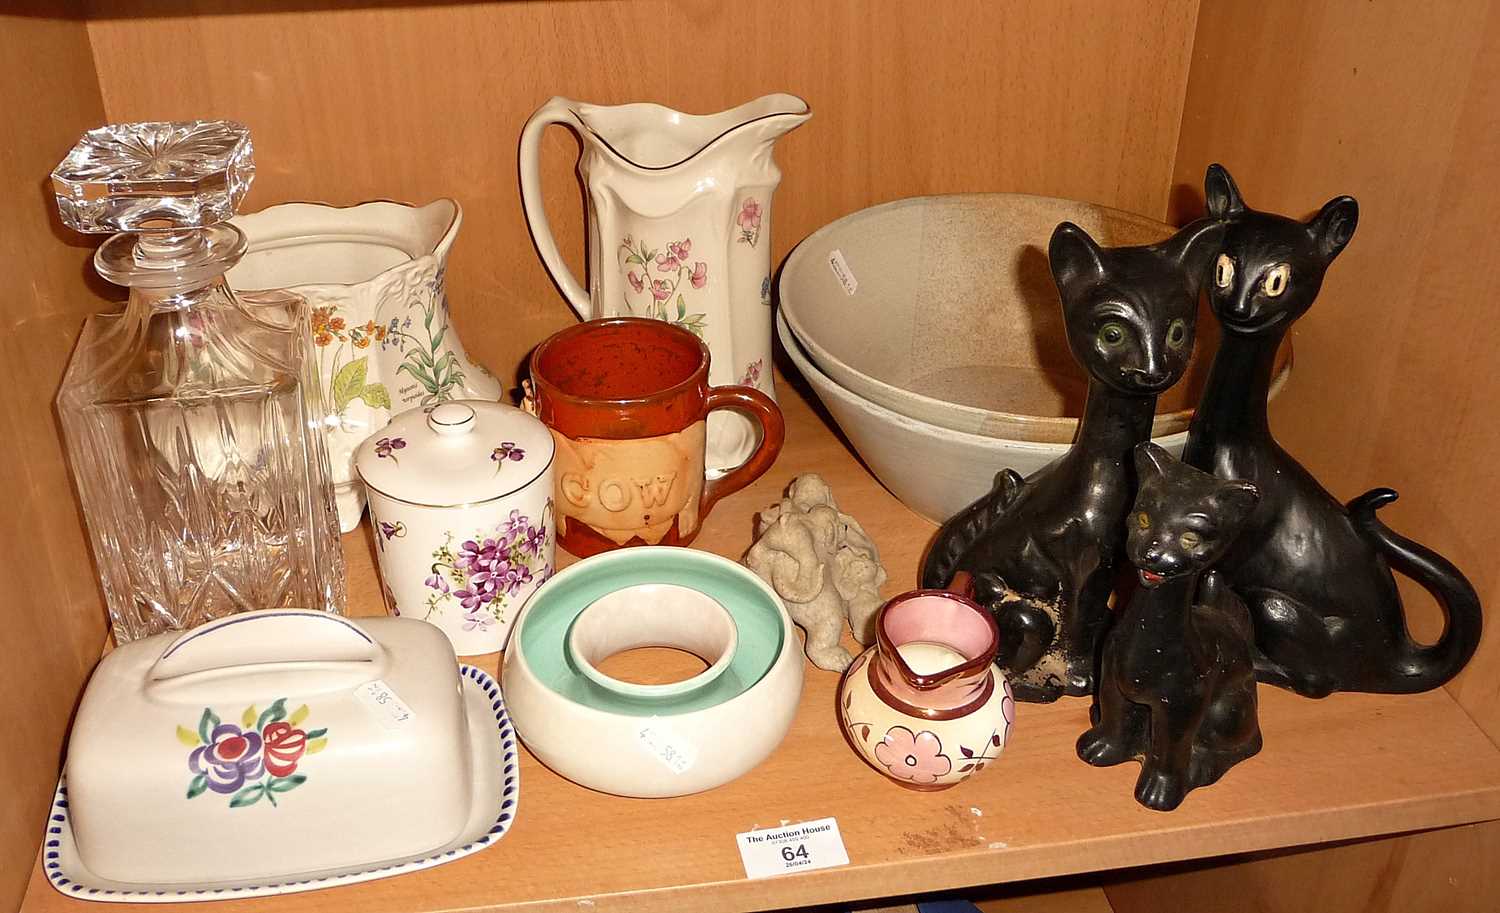 Poole Pottery butter dish, three scary cat figurines and other china with a glass decanter